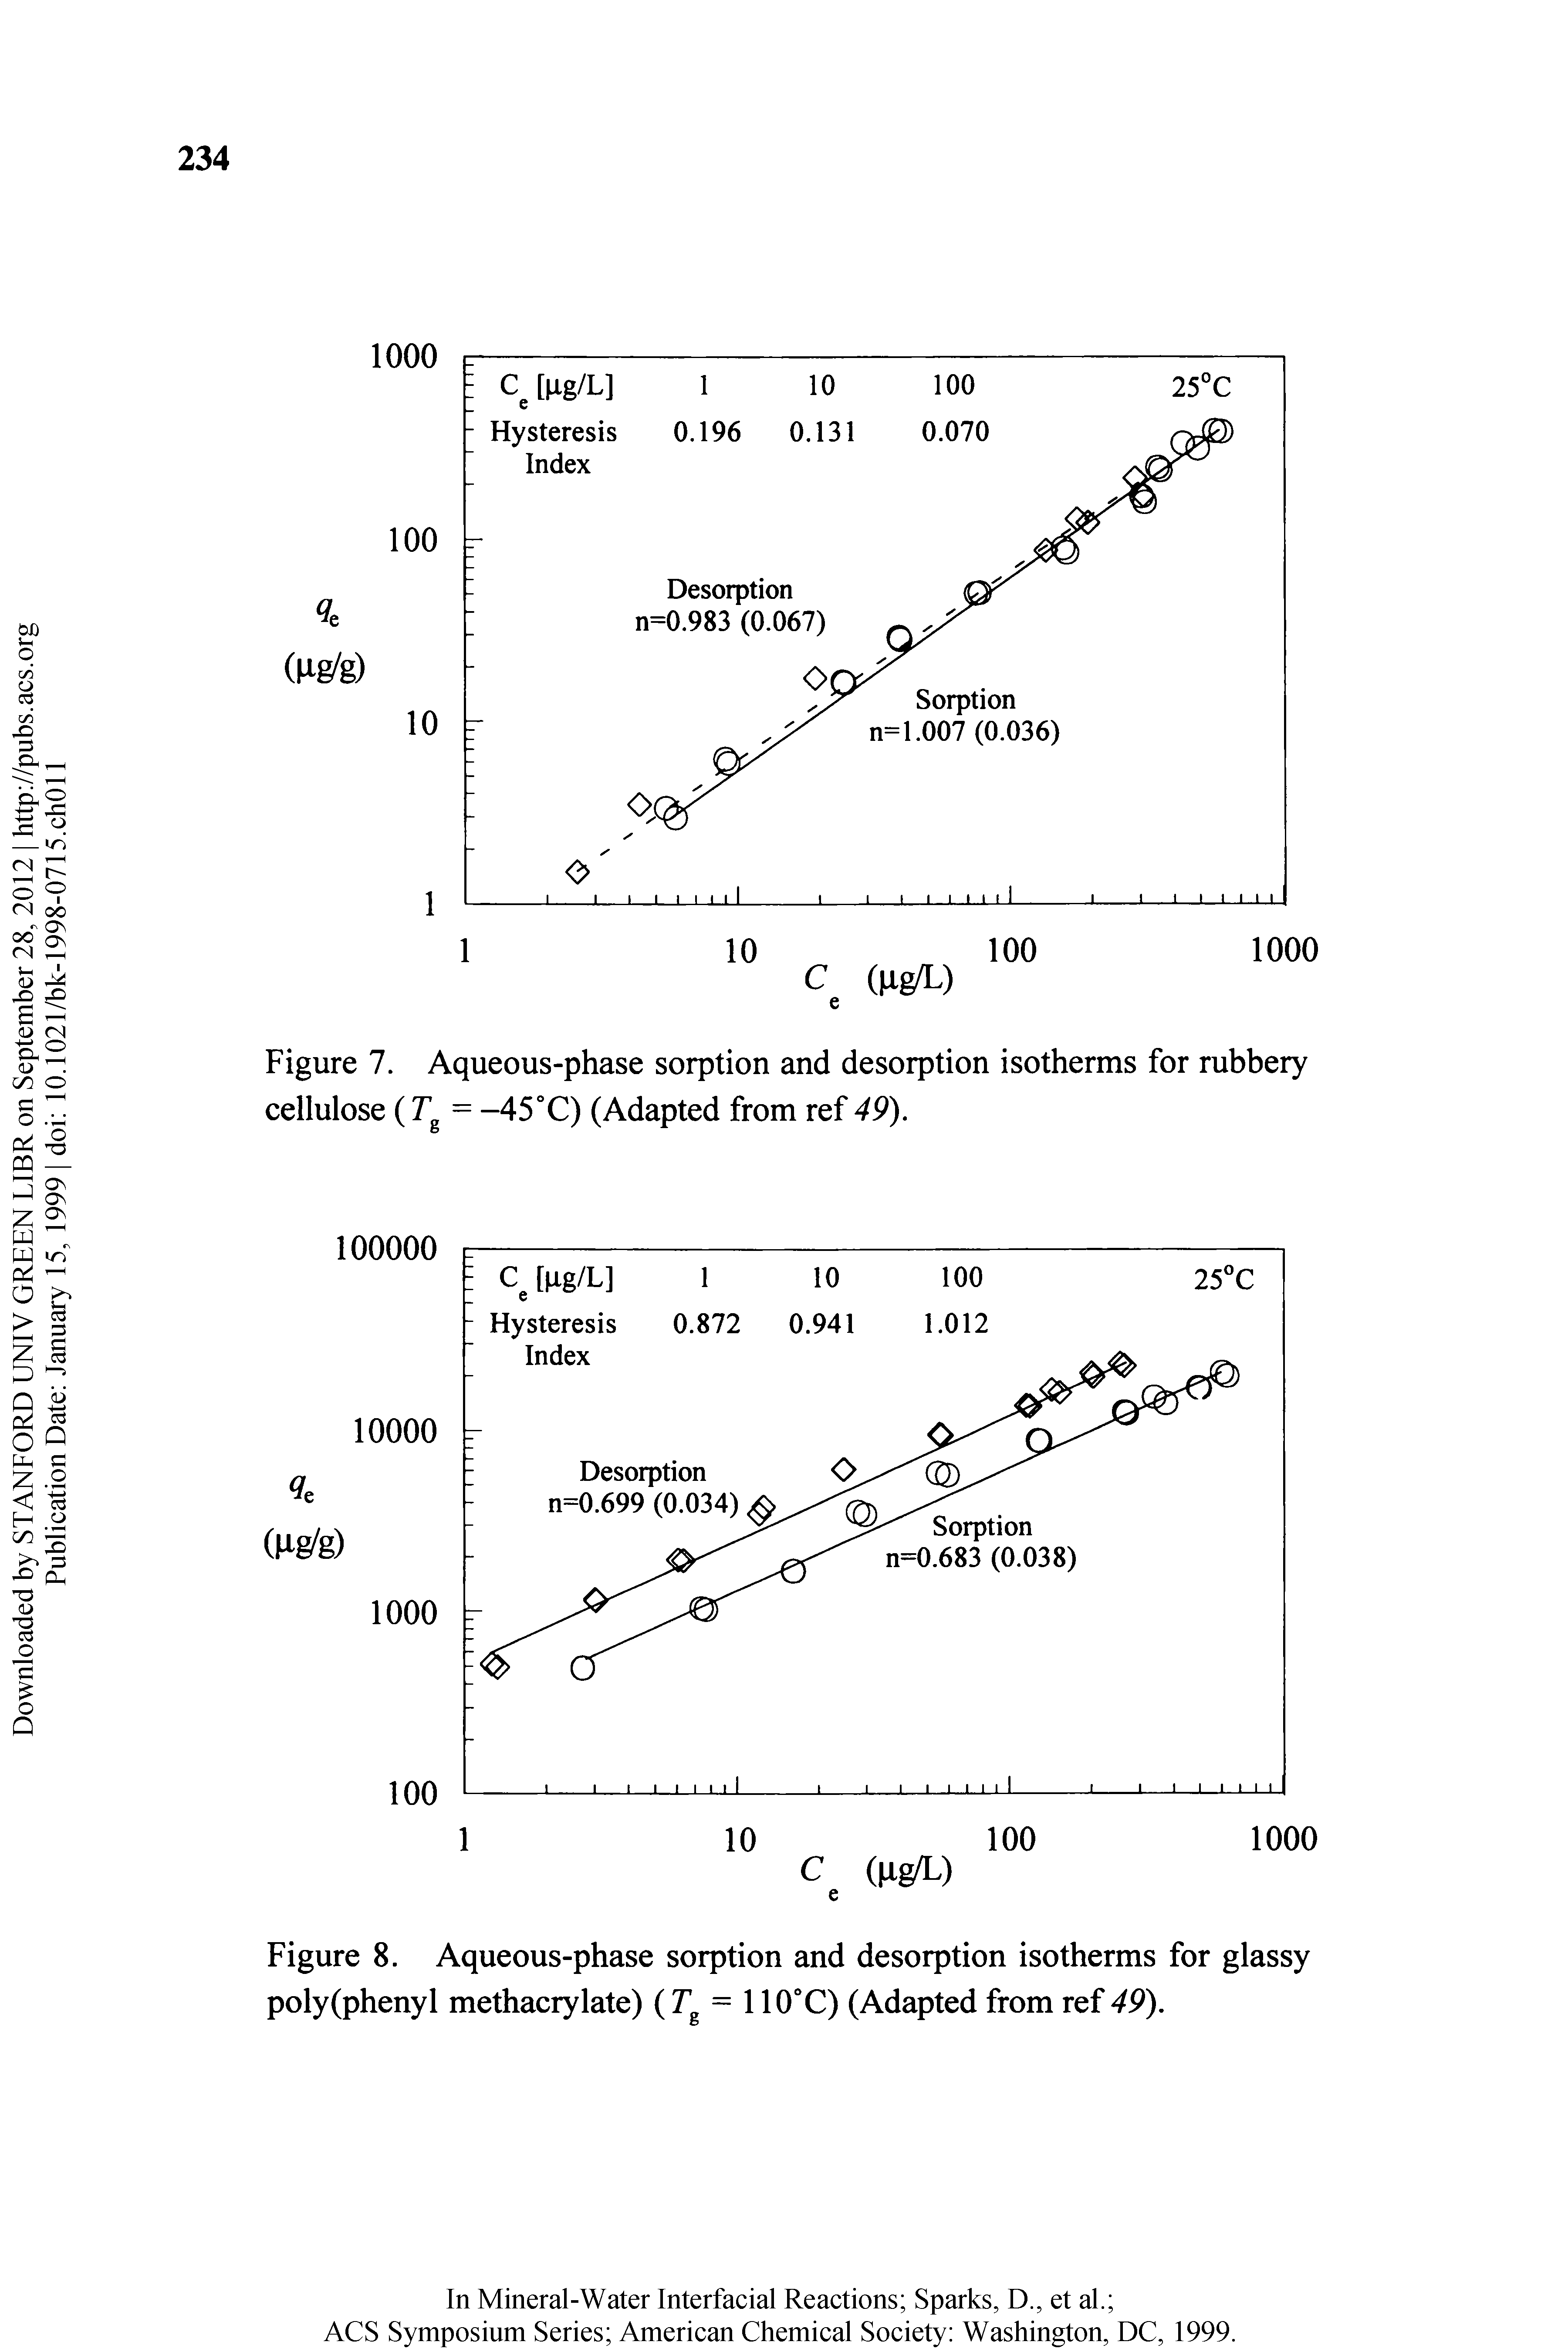 Figure 7. Aqueous-phase sorption and desorption isotherms for rubbery cellulose (T = -45°C) (Adapted from ref 49).